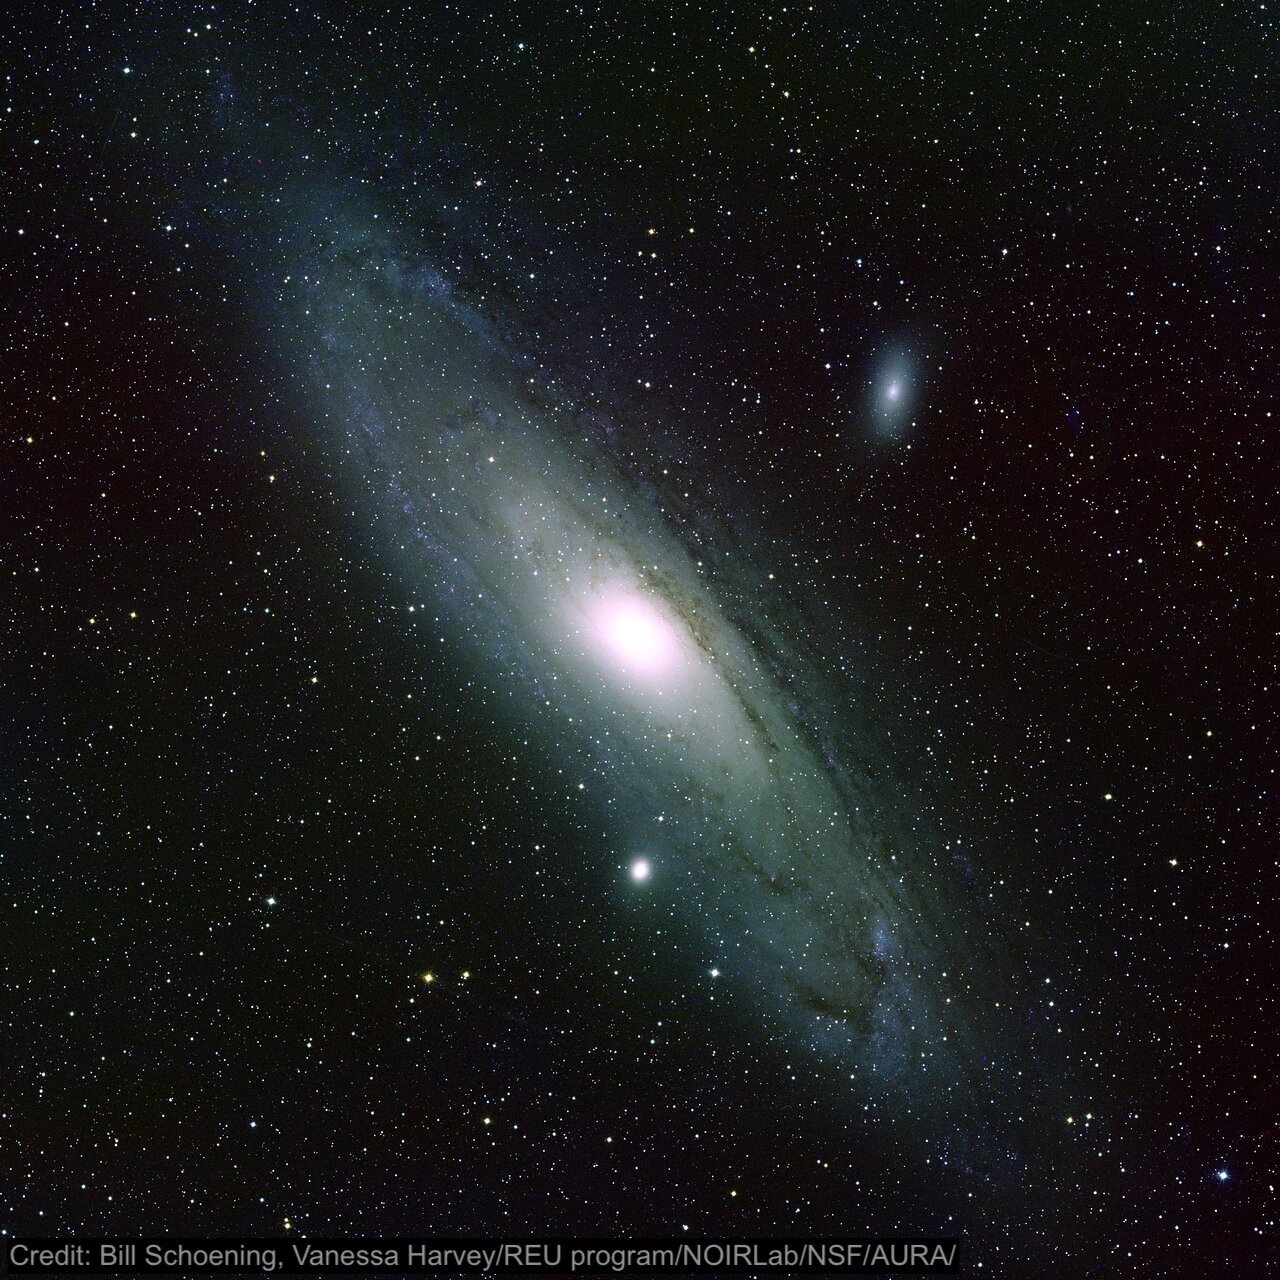 The background of this image is dotted with small circles of light in white and shades of pale yellows, reds, or blues. In the center of the image is a large, elongated oval angled from the top left to bottom right with is the disk of the Andromeda galaxy. At the center of the disk is a circle of bright white, with the rest of the disk filled by hazy white. There is also a smaller bright oval above and to the right of the center of Andromeda, which is one of its companion galaxies. The image is watermarked: “Credit: Bill Schoening, Vanessa Harvey/REU program/NOIRLab/NSF/AURA.” 